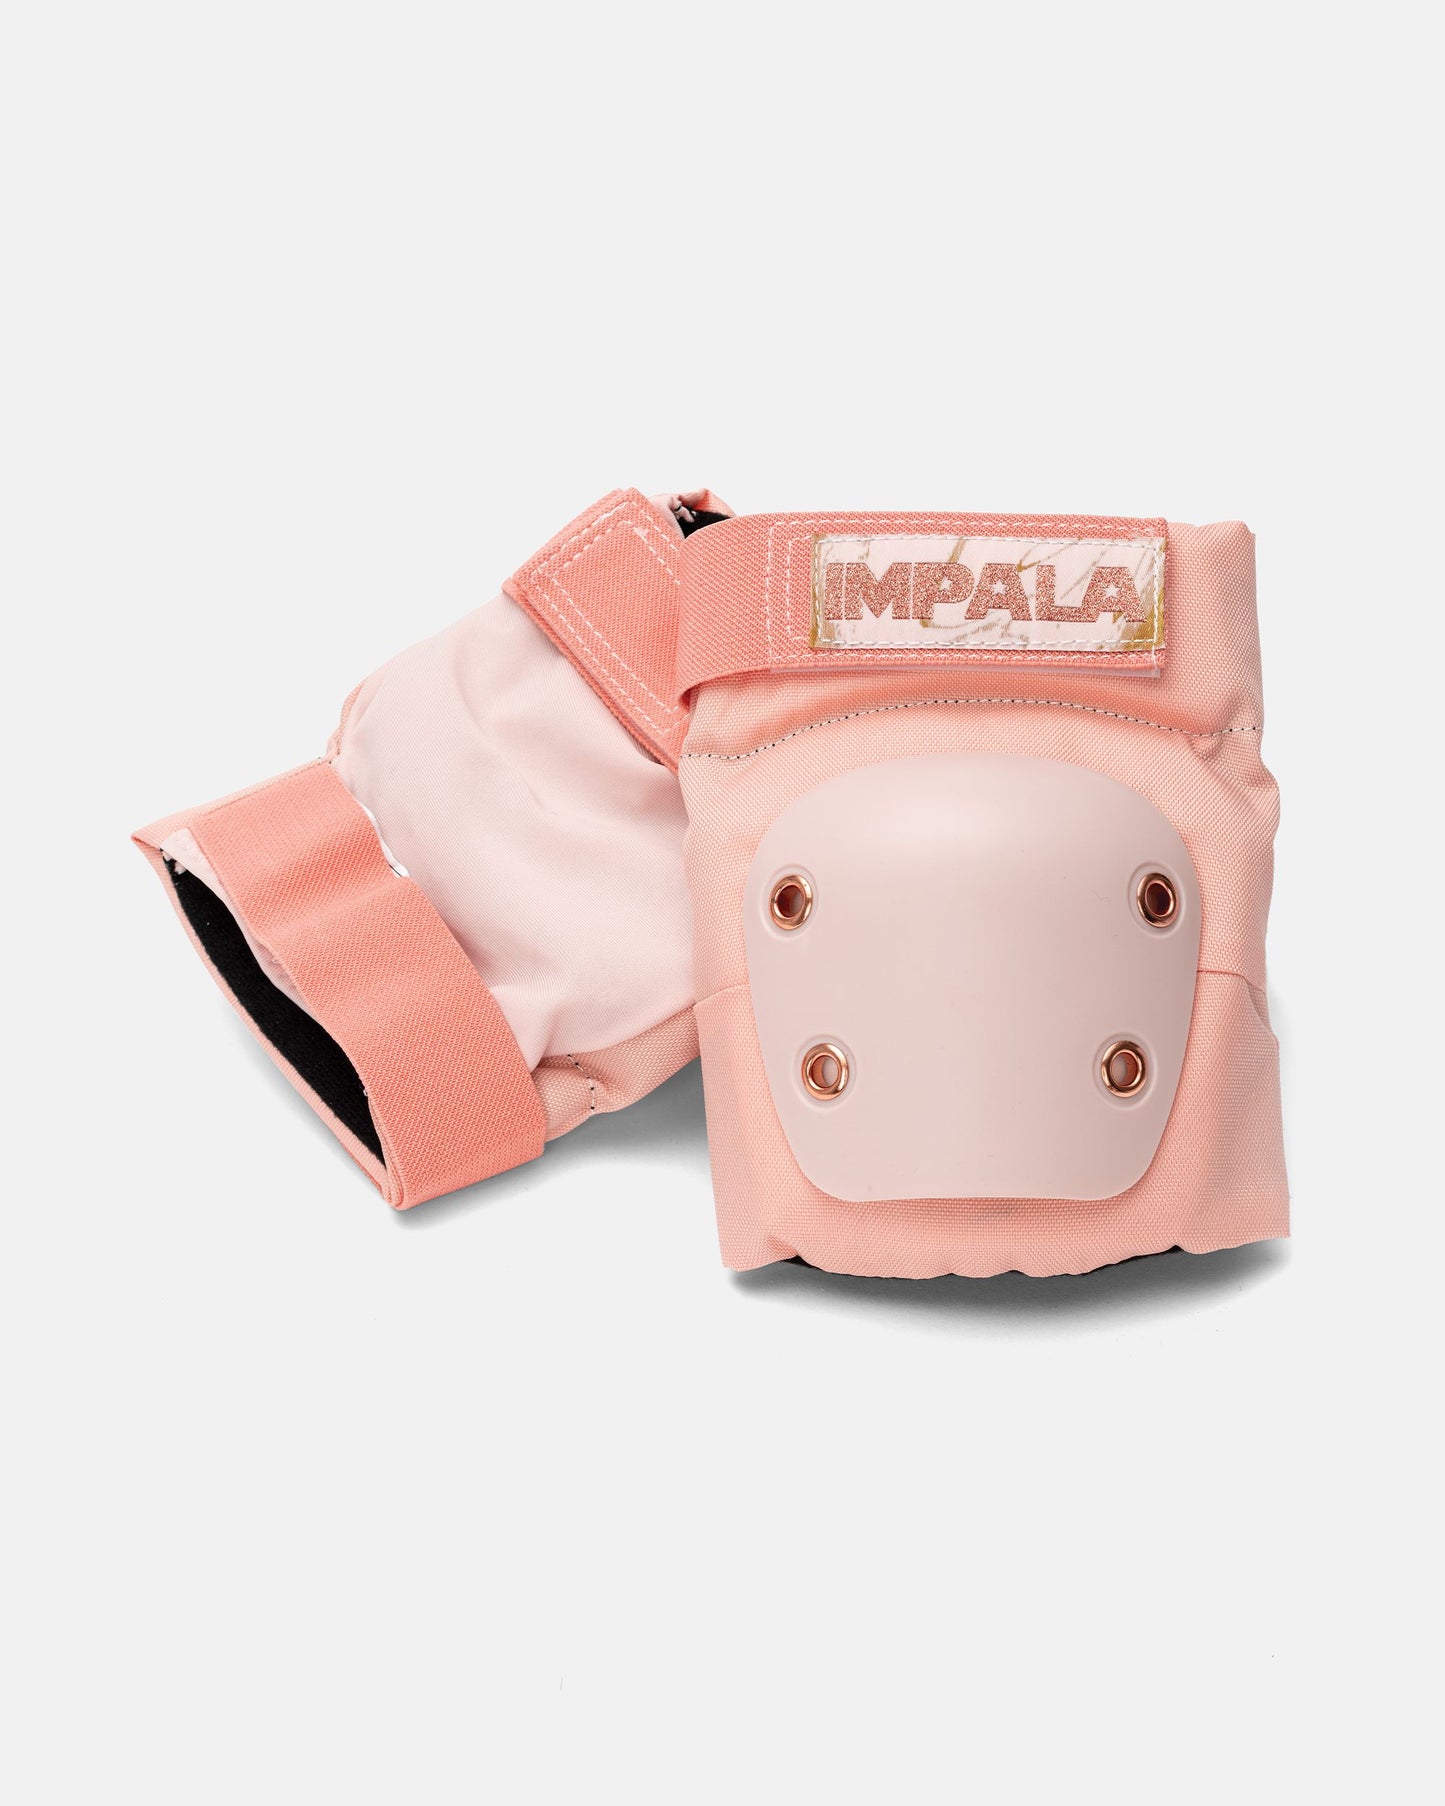 Elbow pads in the Impala Protective Set - Marawa Rose Gold